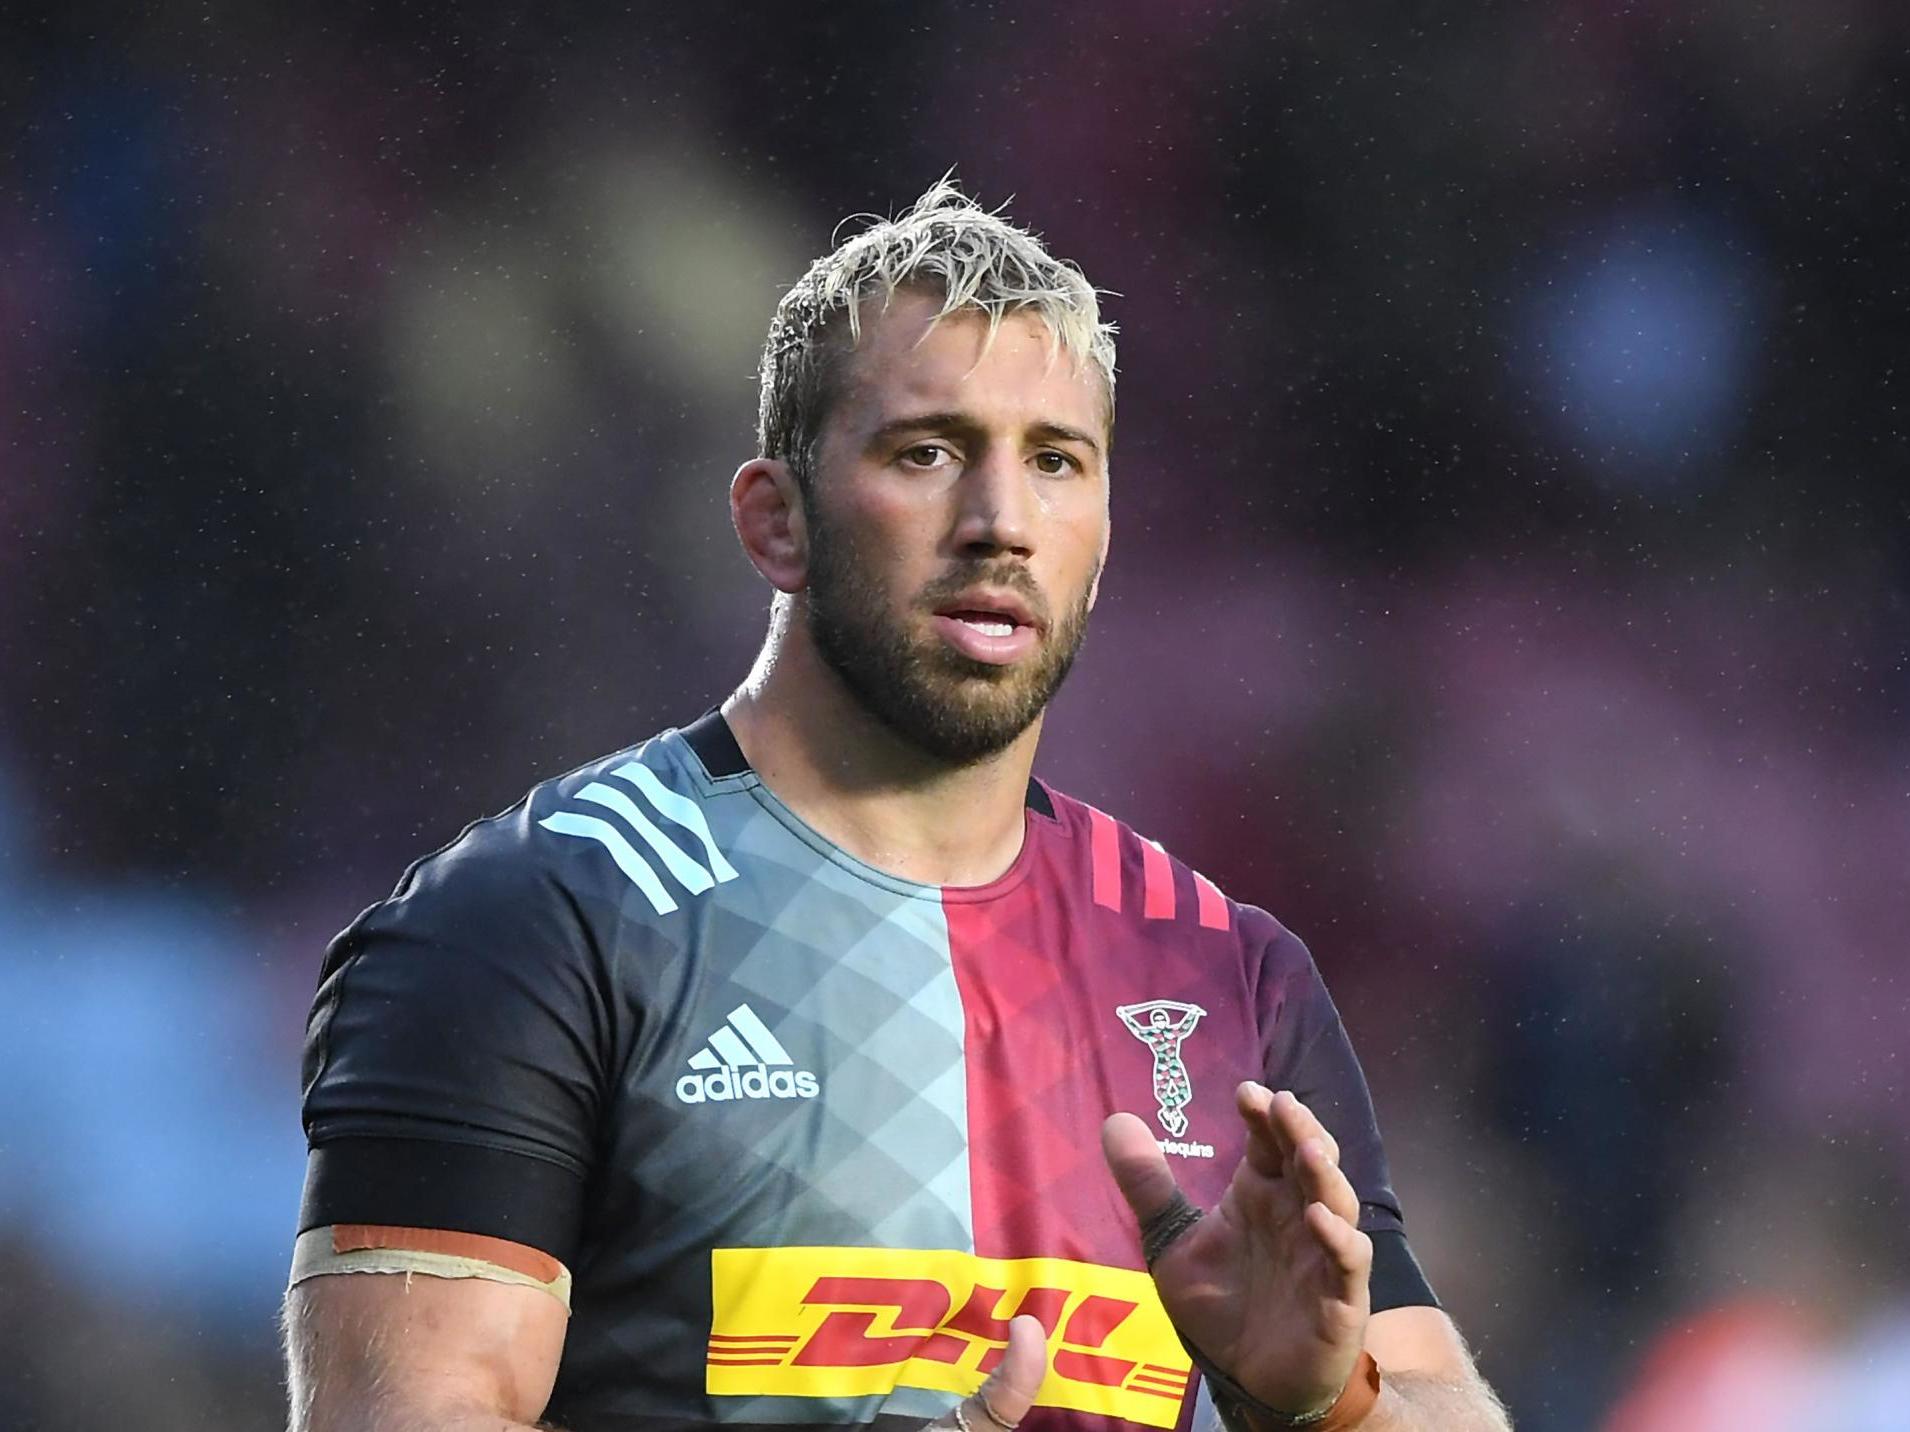 Chris Robshaw fears rugby may struggle to recover from the Saracens scandal (Getty)